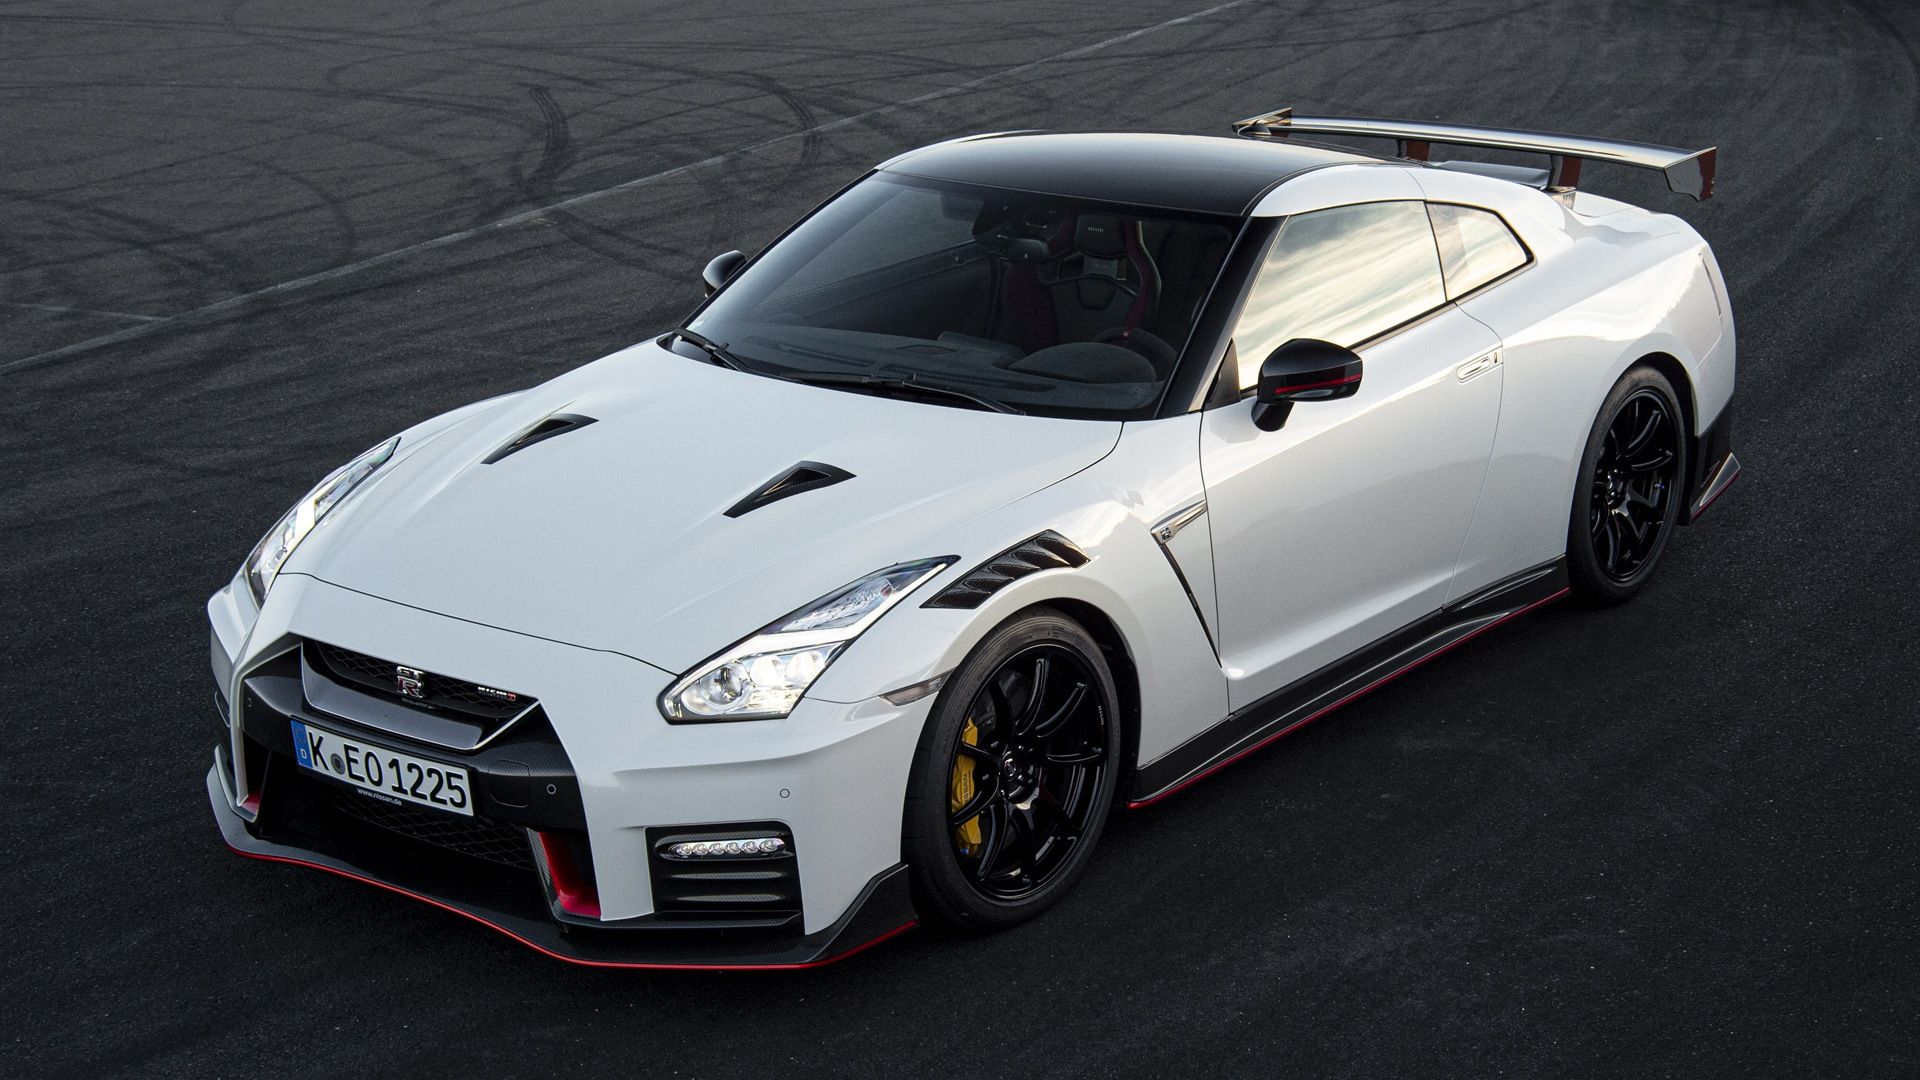 Nissan GT-R Nismo parked on track